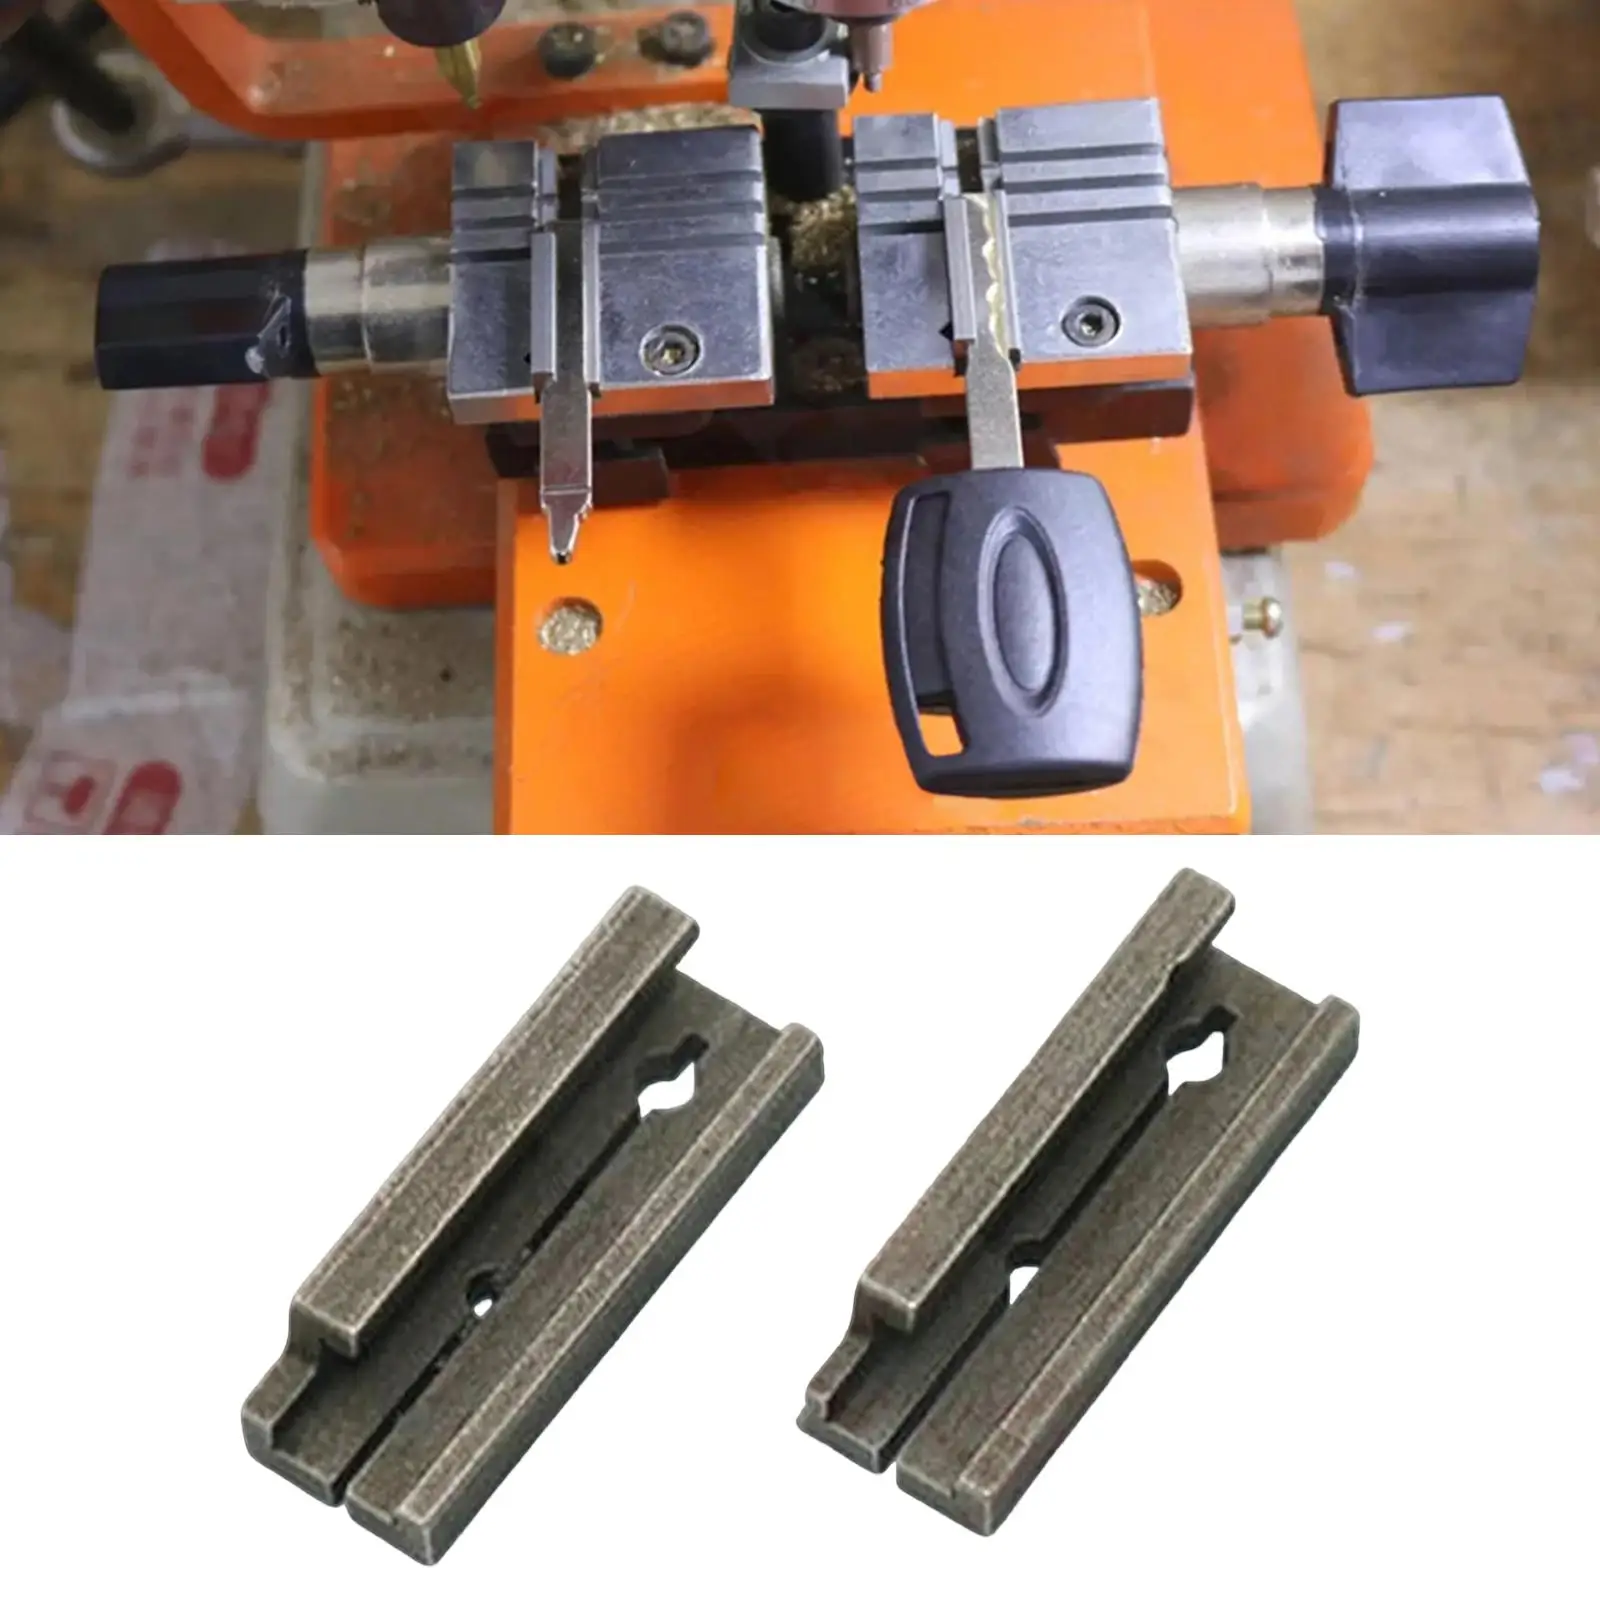 HU101 Duplicating Fixture Clamp Stainless Steel for Ford Blank Key Cutting Key Cutter Machine Part High Qualtiy